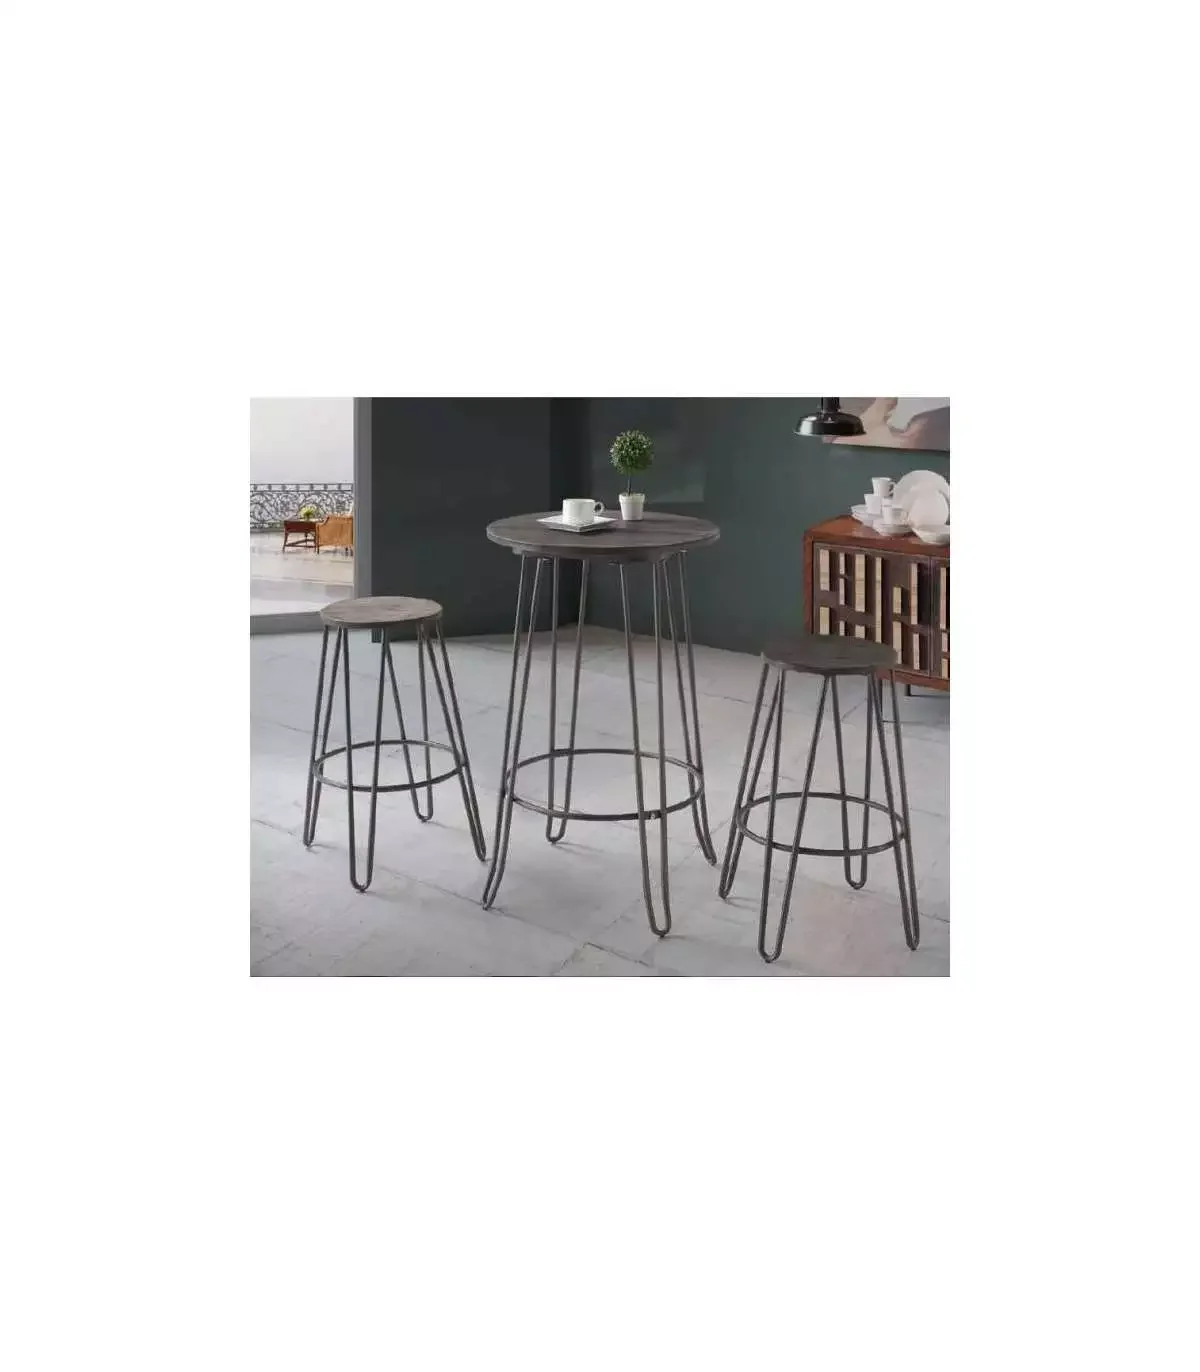 

Table Set with Chairs for Living Room Stools Set Kitchen Table and 2 Stools Finished metal/Wood KitCloset Board Room Furniture H